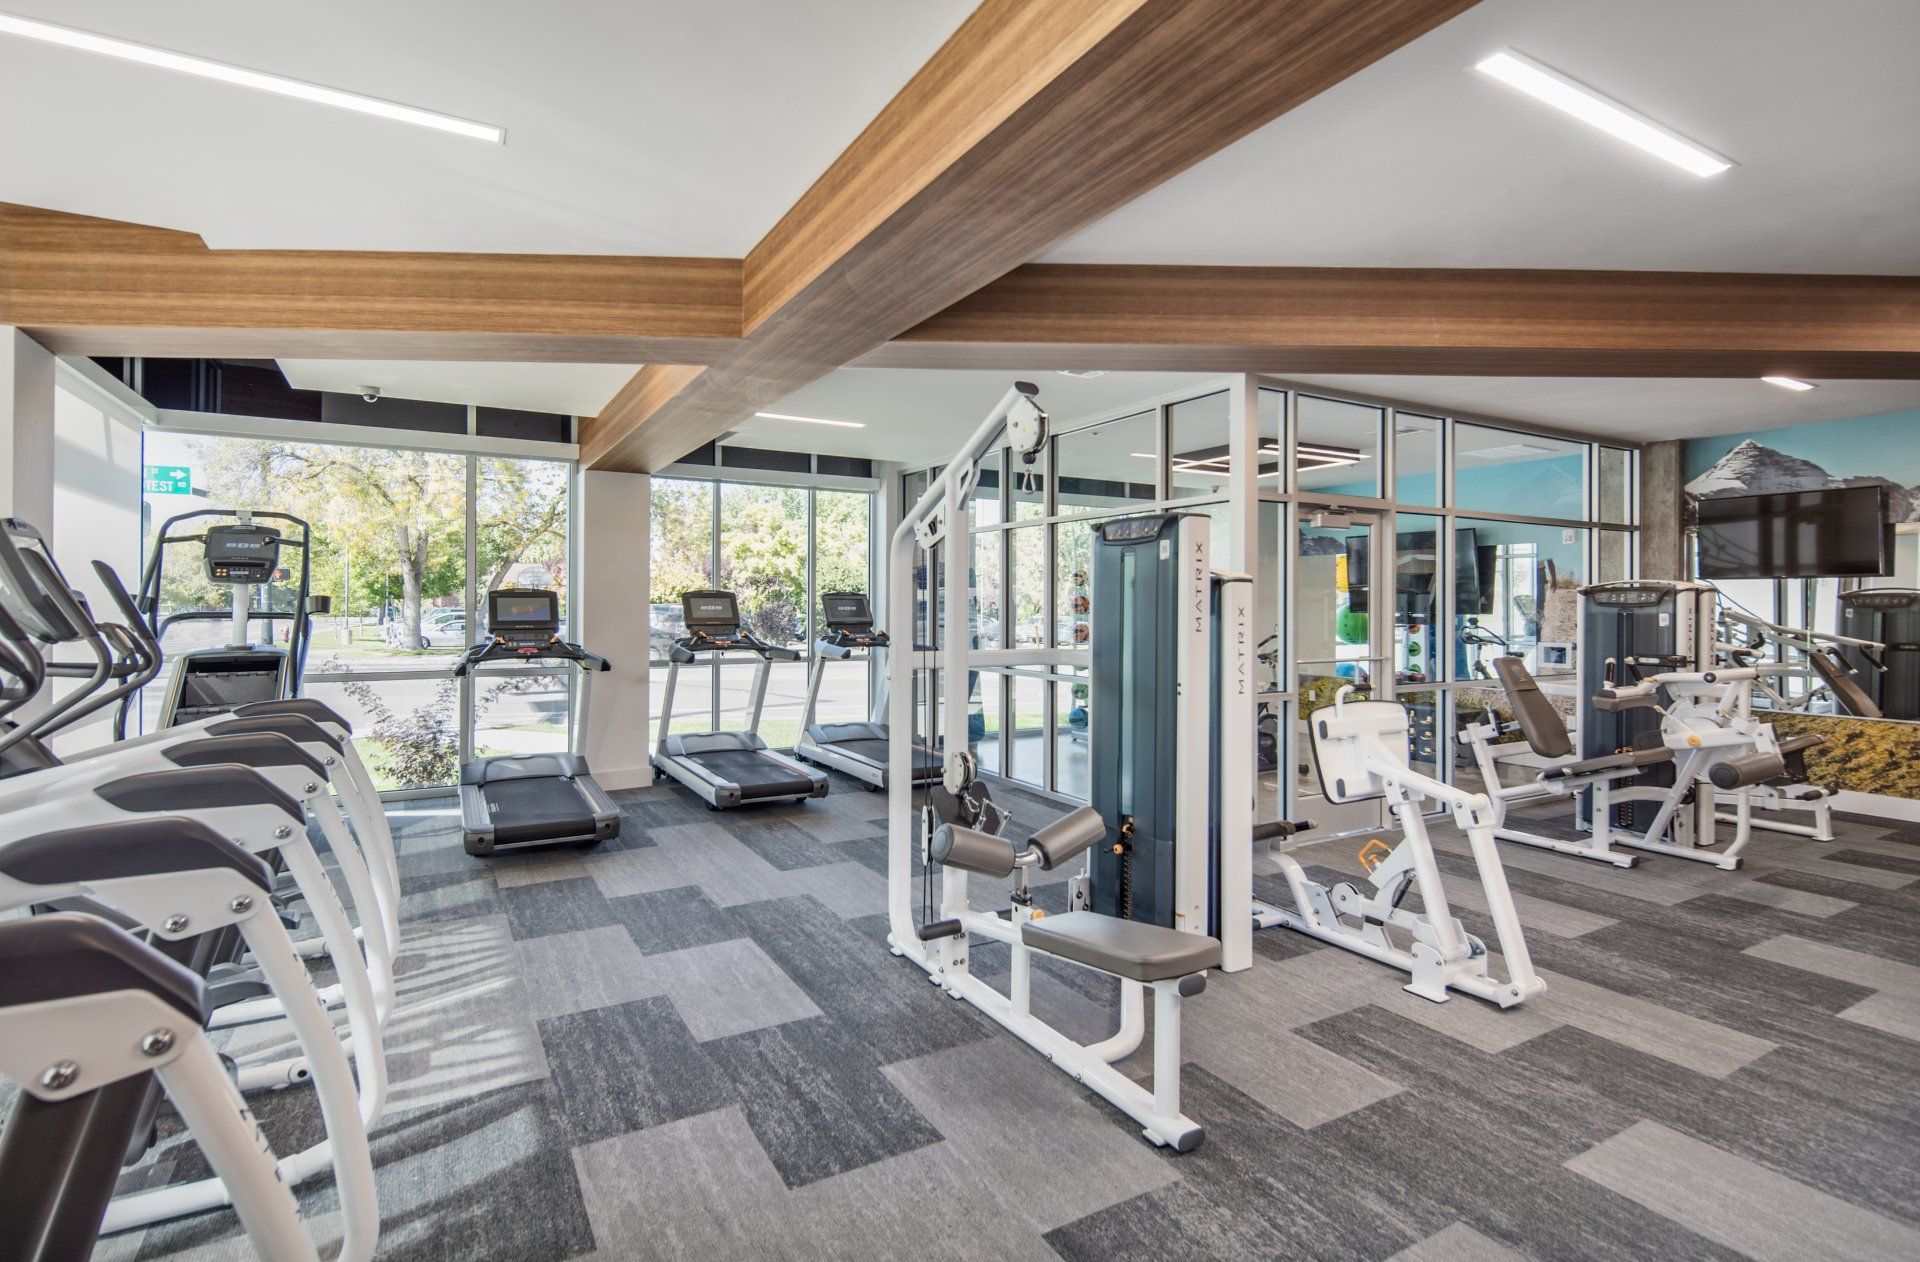 24-Hour Fitness Center at Identity Boise.